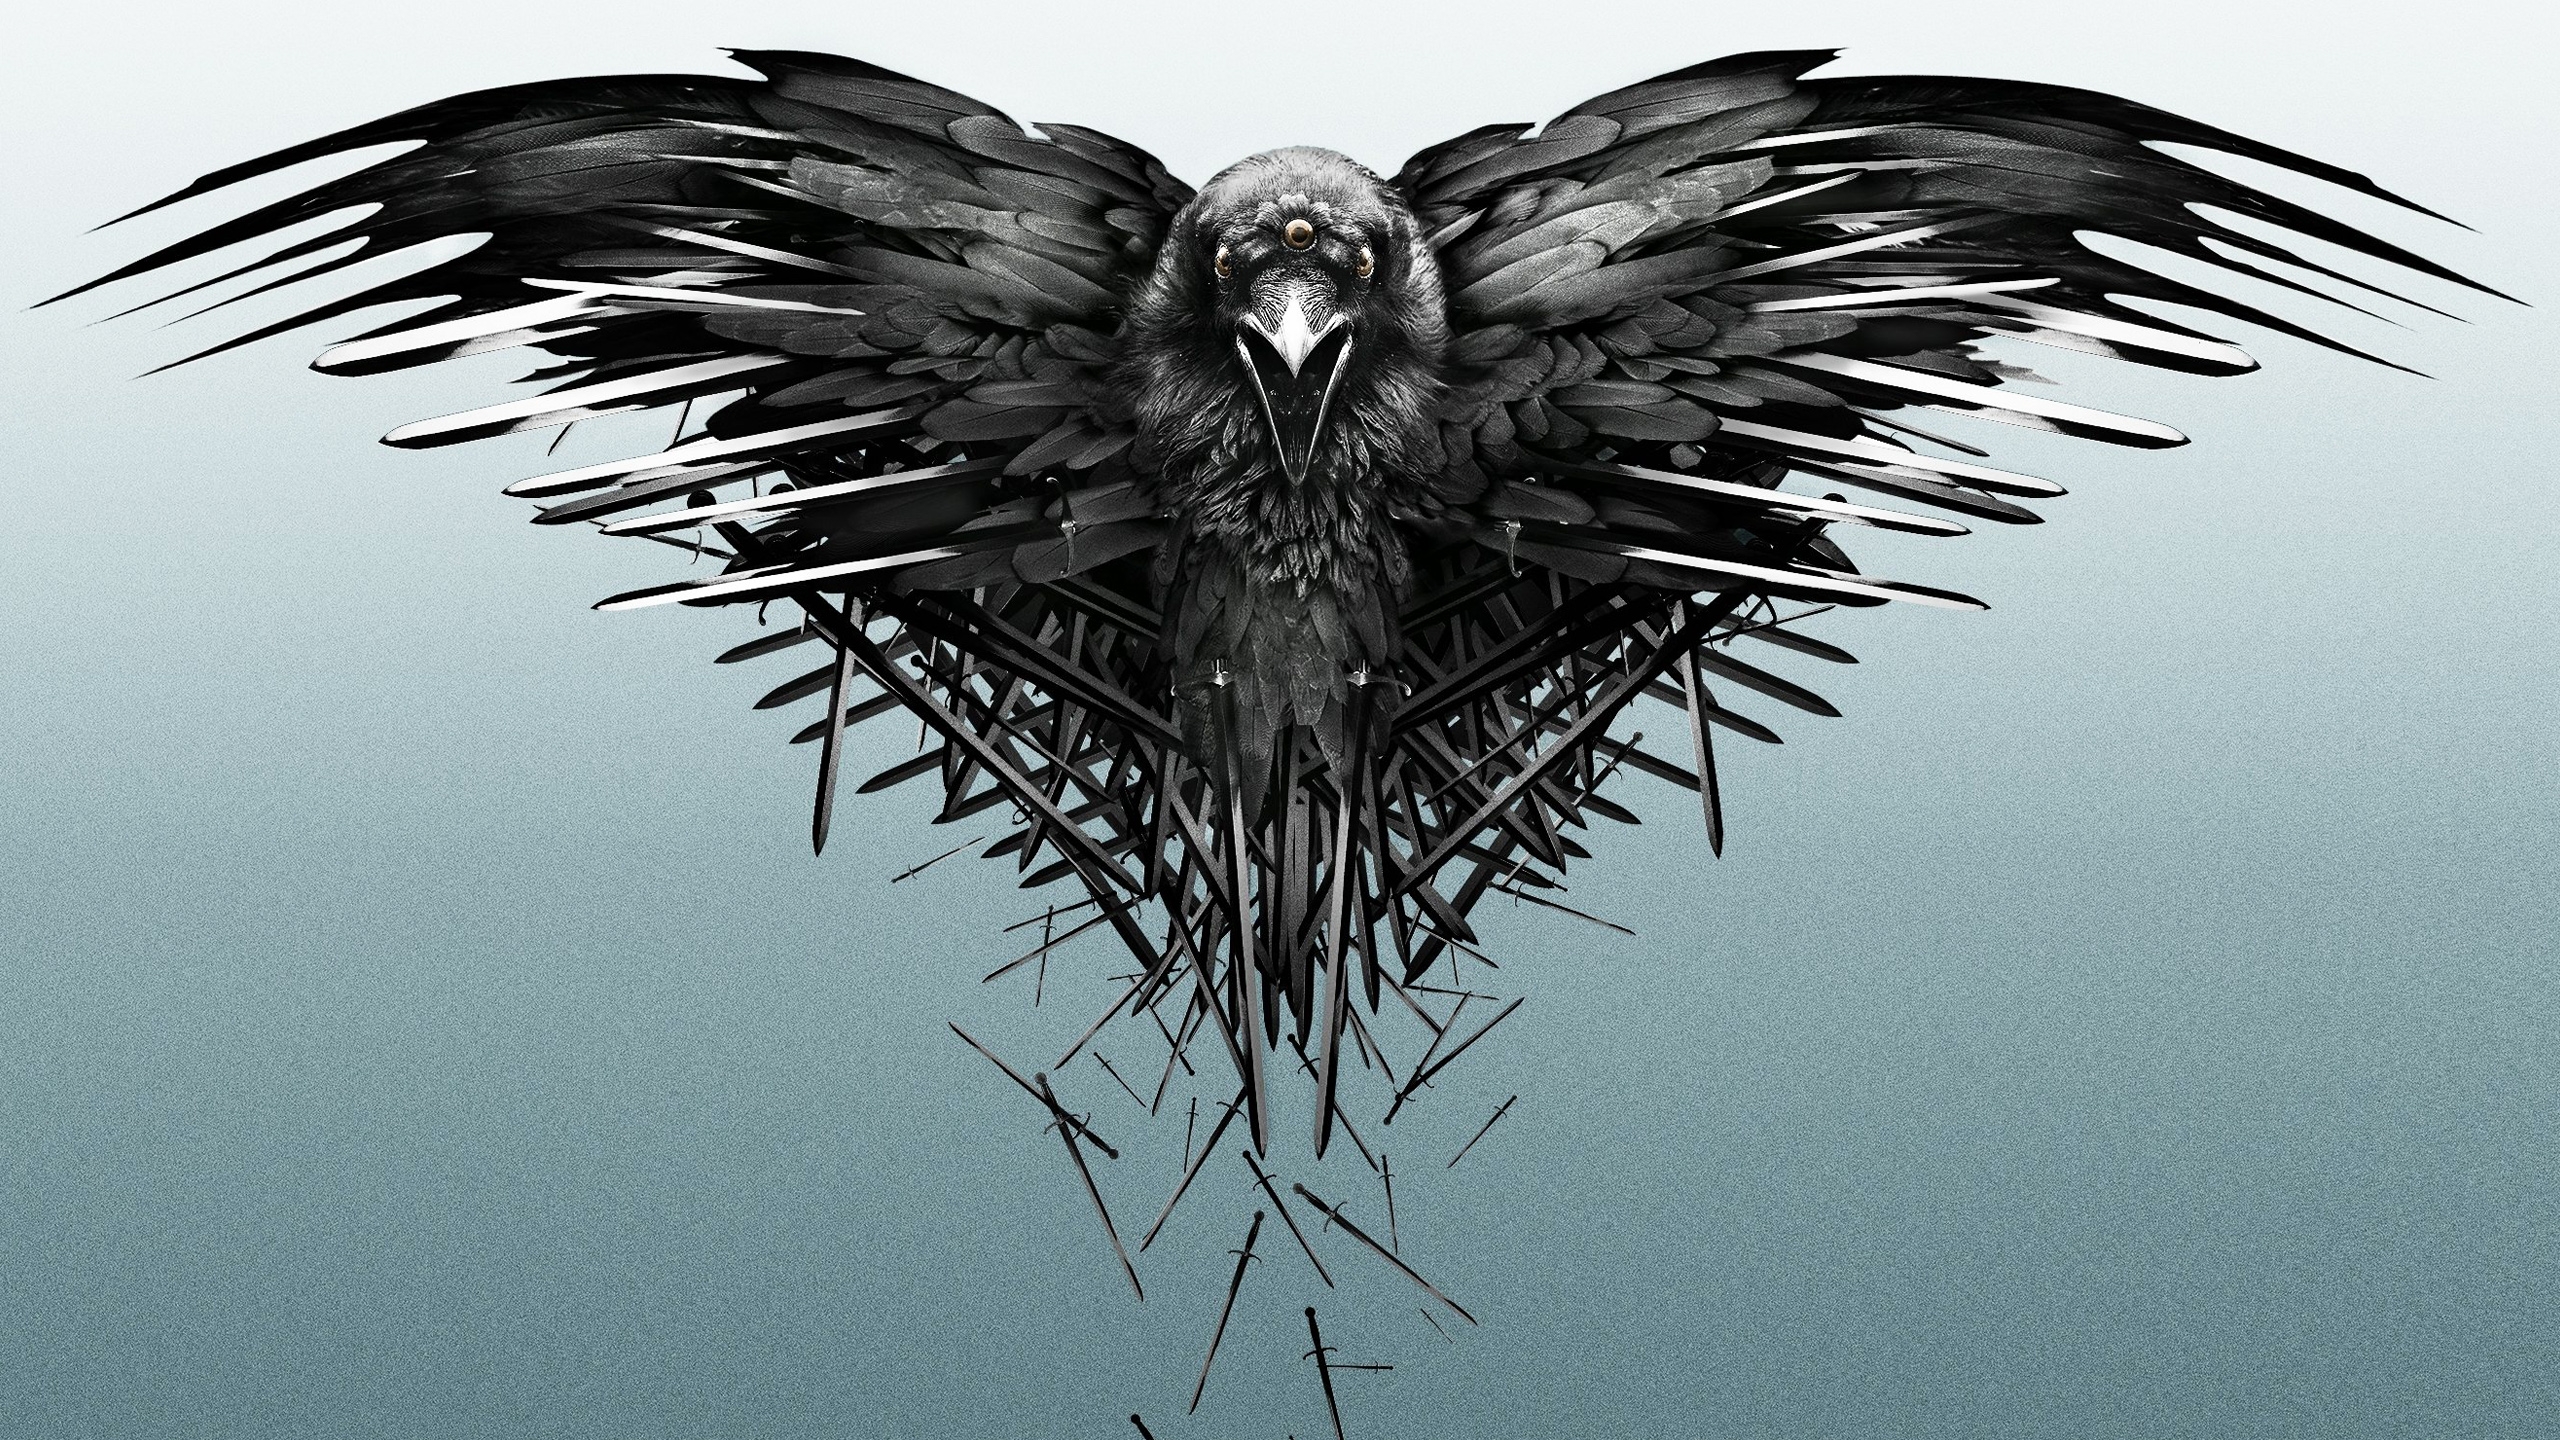 tv show, bird, crow, game of thrones collection of HD images